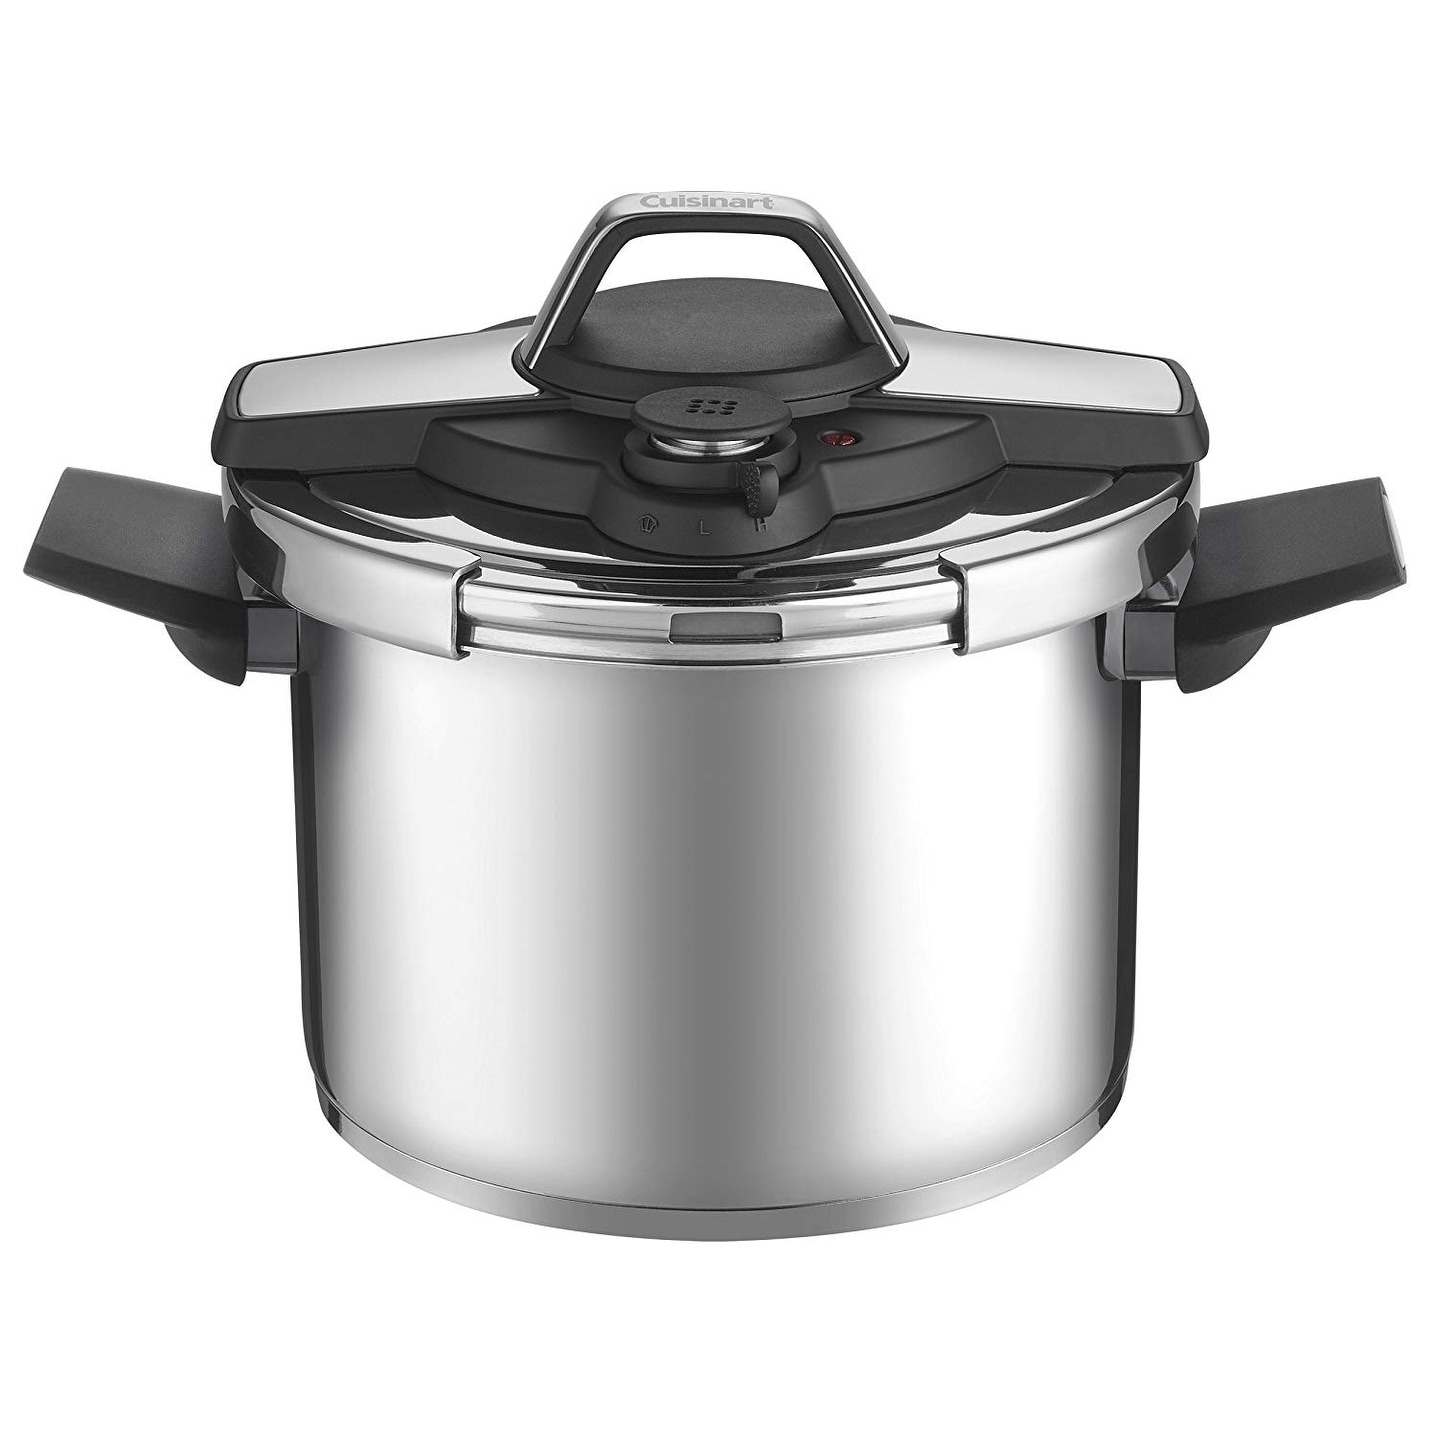 https://ak1.ostkcdn.com/images/products/is/images/direct/2127b03393d91675941a7bc18d3aa84ed5c68b05/Cuisinart-CPC22-6-Professional-Collection-Stainless-Pressure-Cooker%2C-6-Quart%2C-Silver.jpg